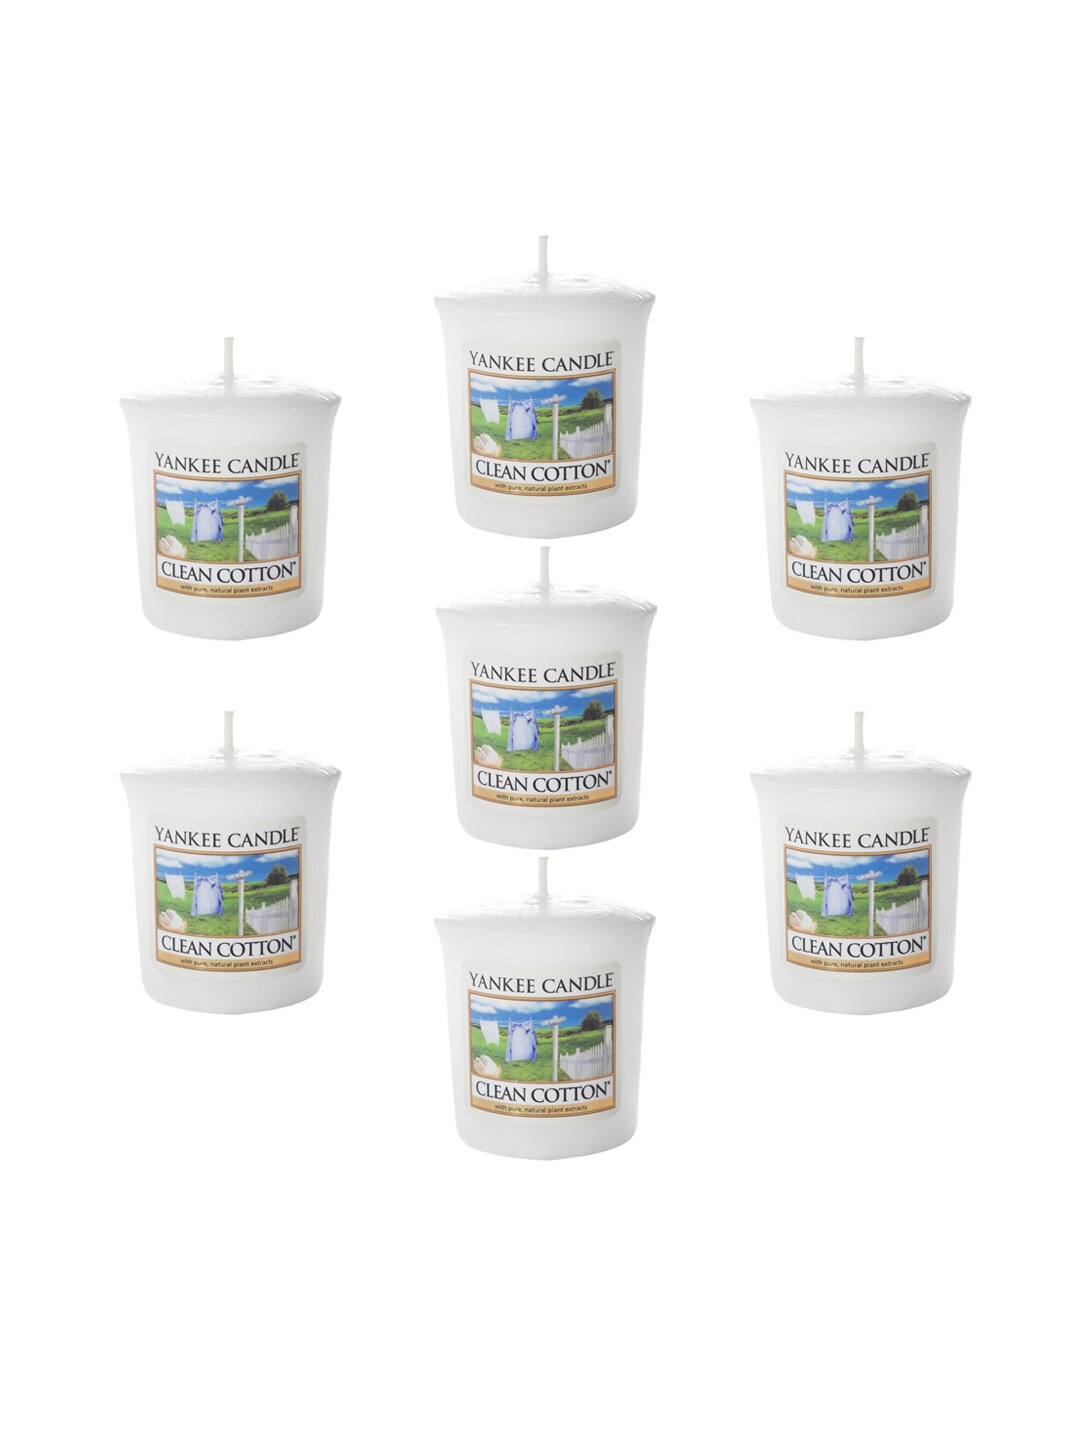 YANKEE CANDLE Set Of 7 Classic Votive Clean Cotton Scented Candles Price in India